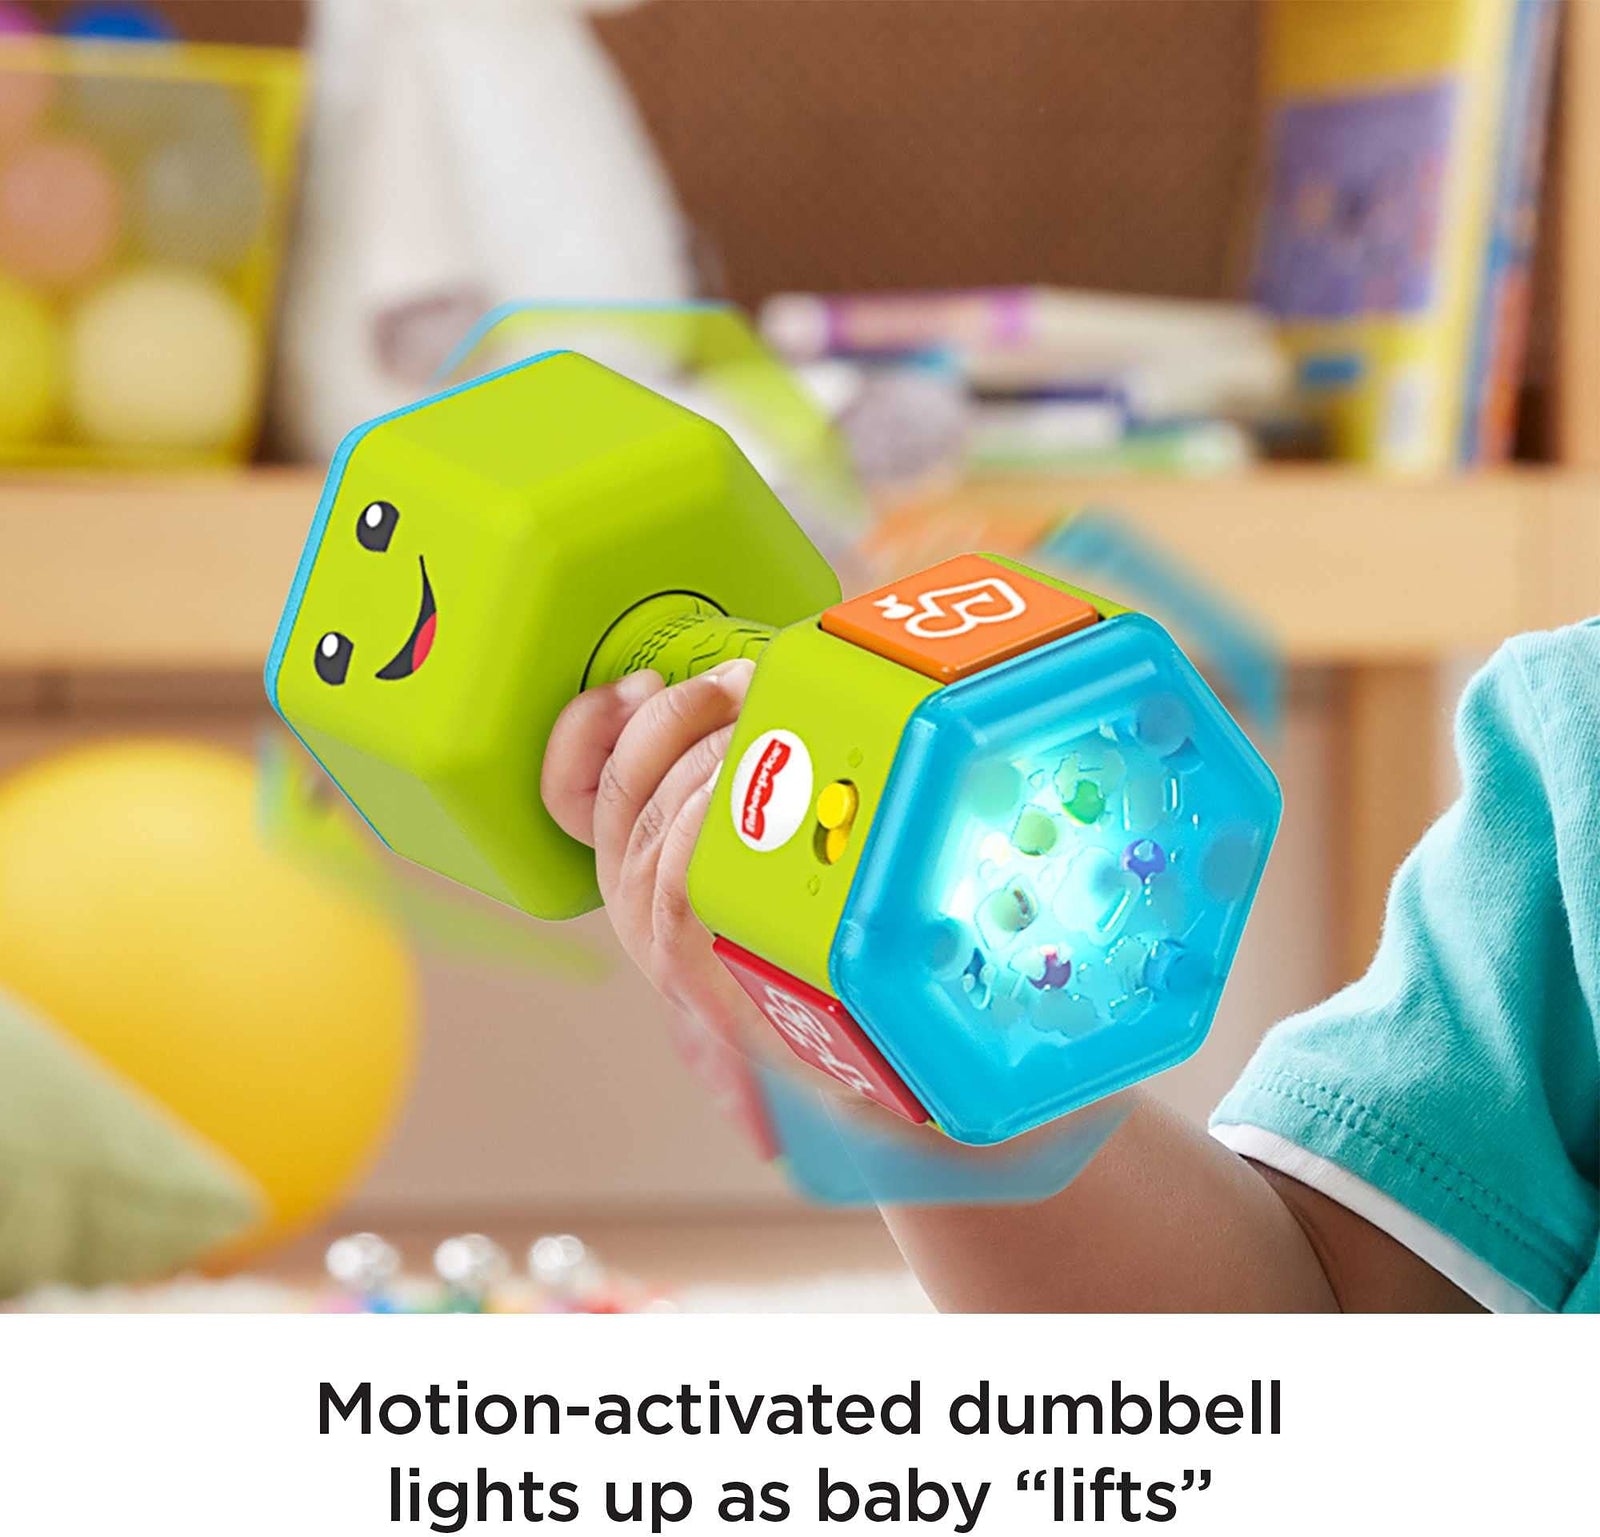 Fisher-Price Laugh & Learn Countin' Reps Dumbbell rattle toy with music, lights and learning content for baby and toddler ages 6-36 months